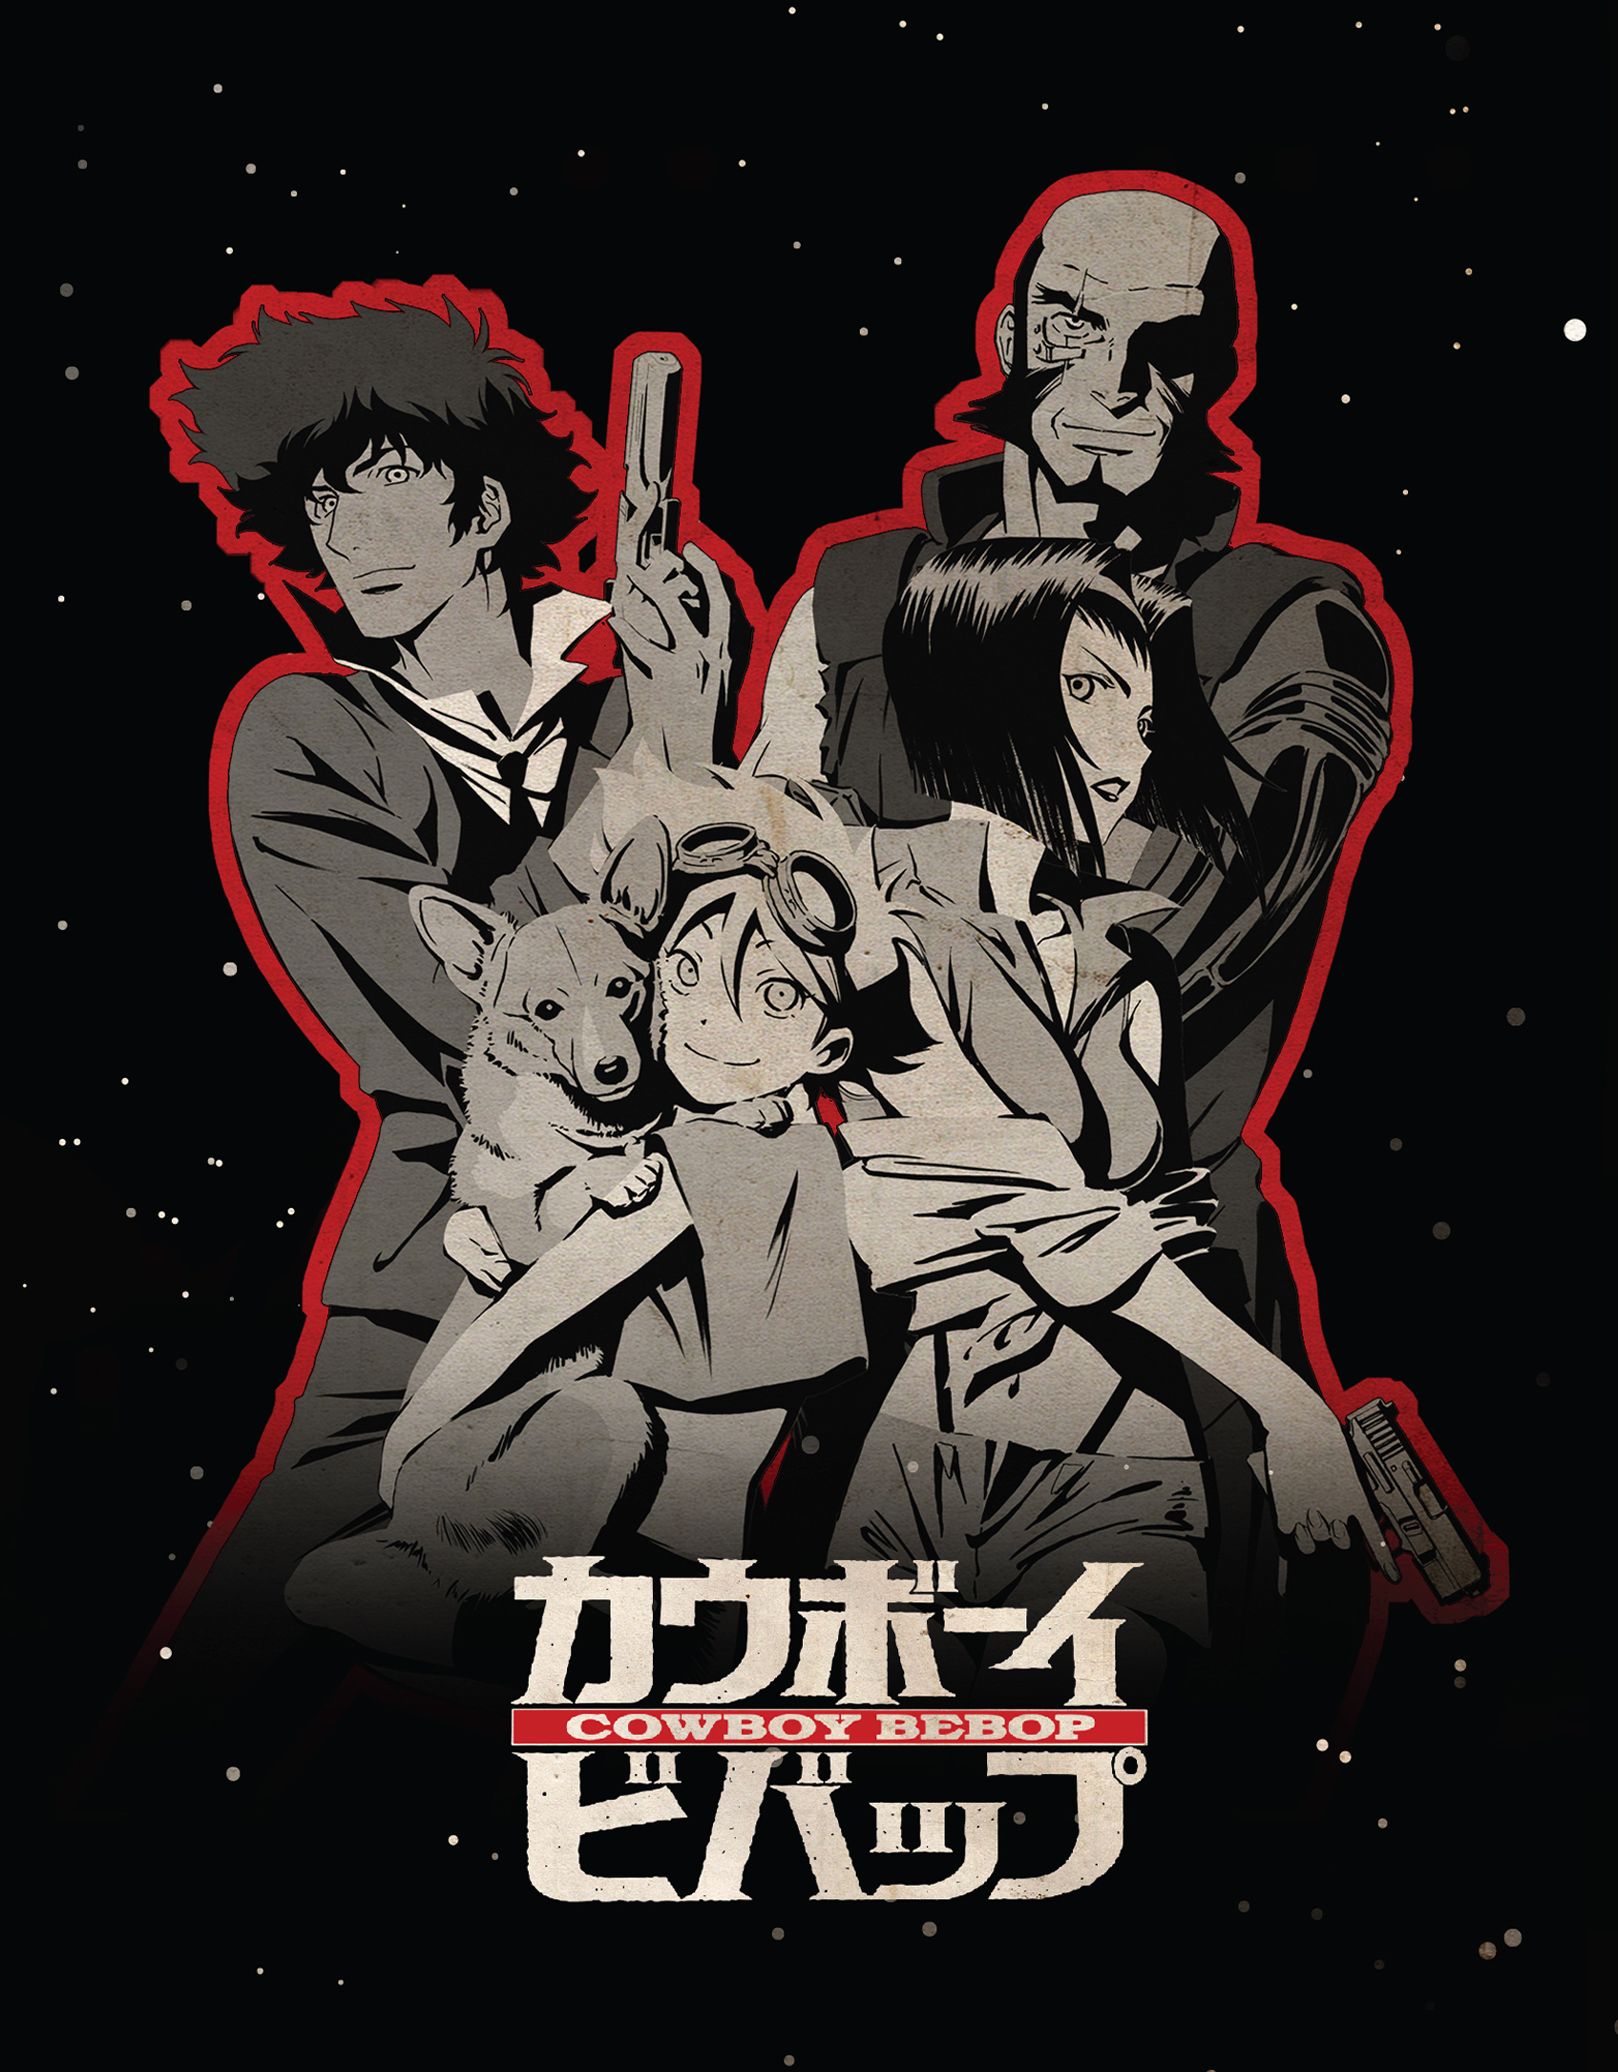 Cowboy Bebop Gets Limited Edition Blu-ray Release For 25th Anniversary